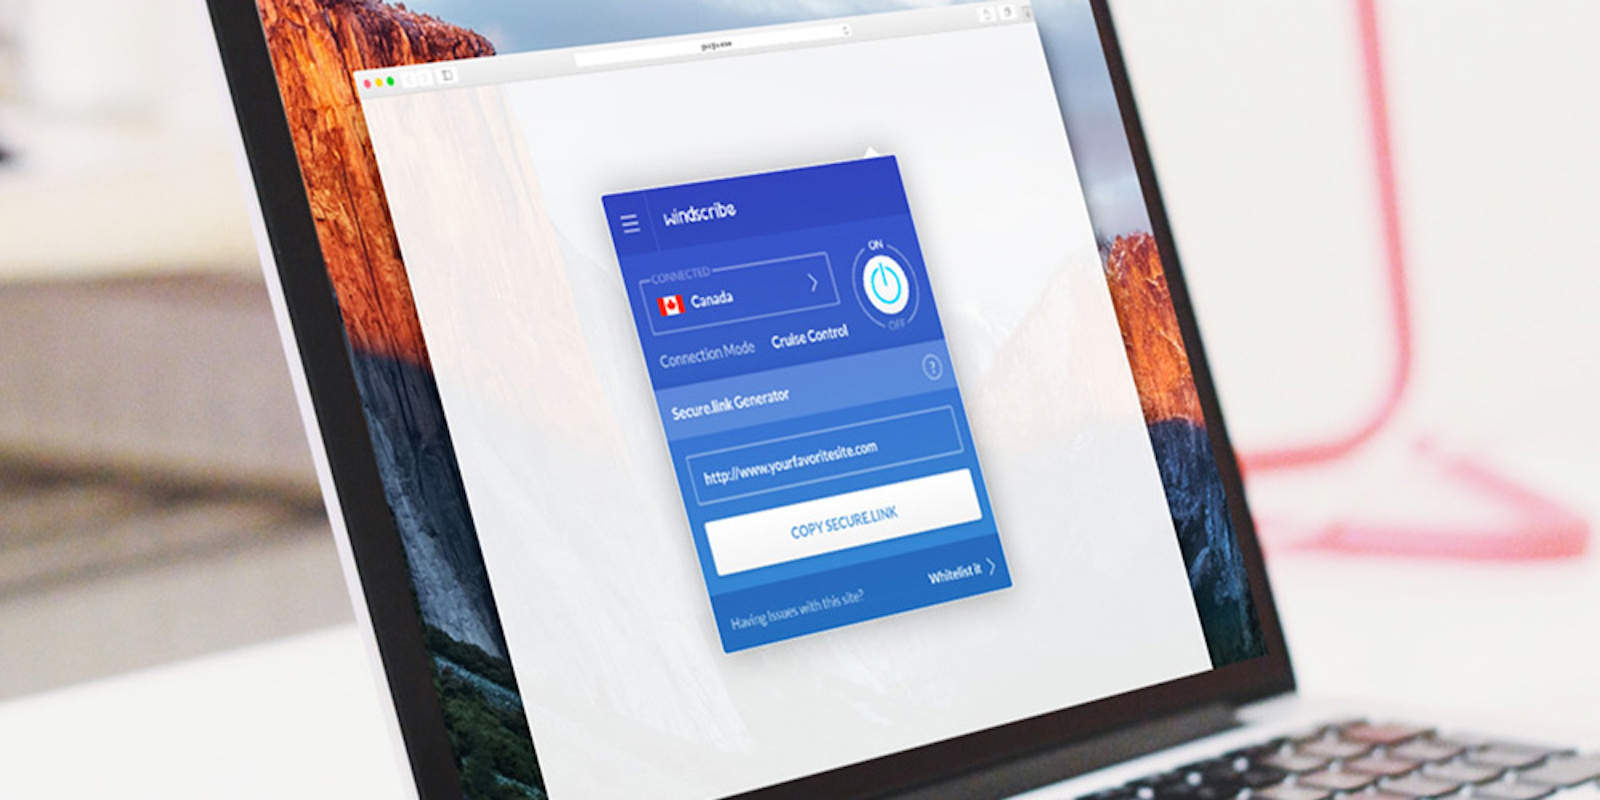 This VPN operates as a desktop app and browser extension, making it as easy to use as email.